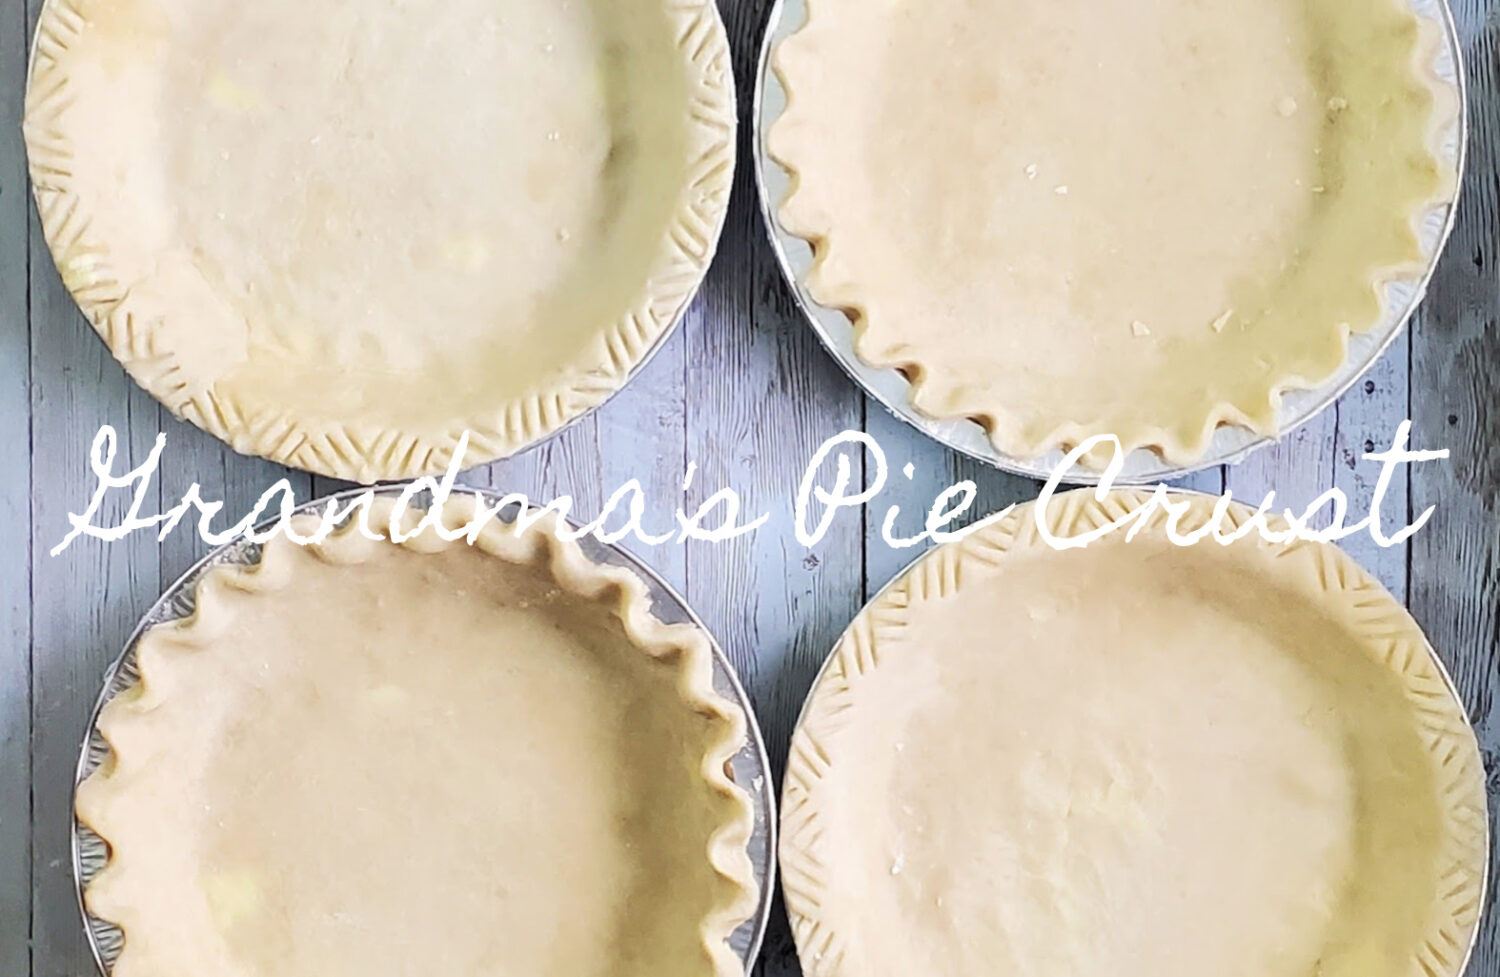 Grandma's Pie Crust; The flakiest baked pie crust with the perfect fat to flour ratio, and tips straight from my Grandma to you.